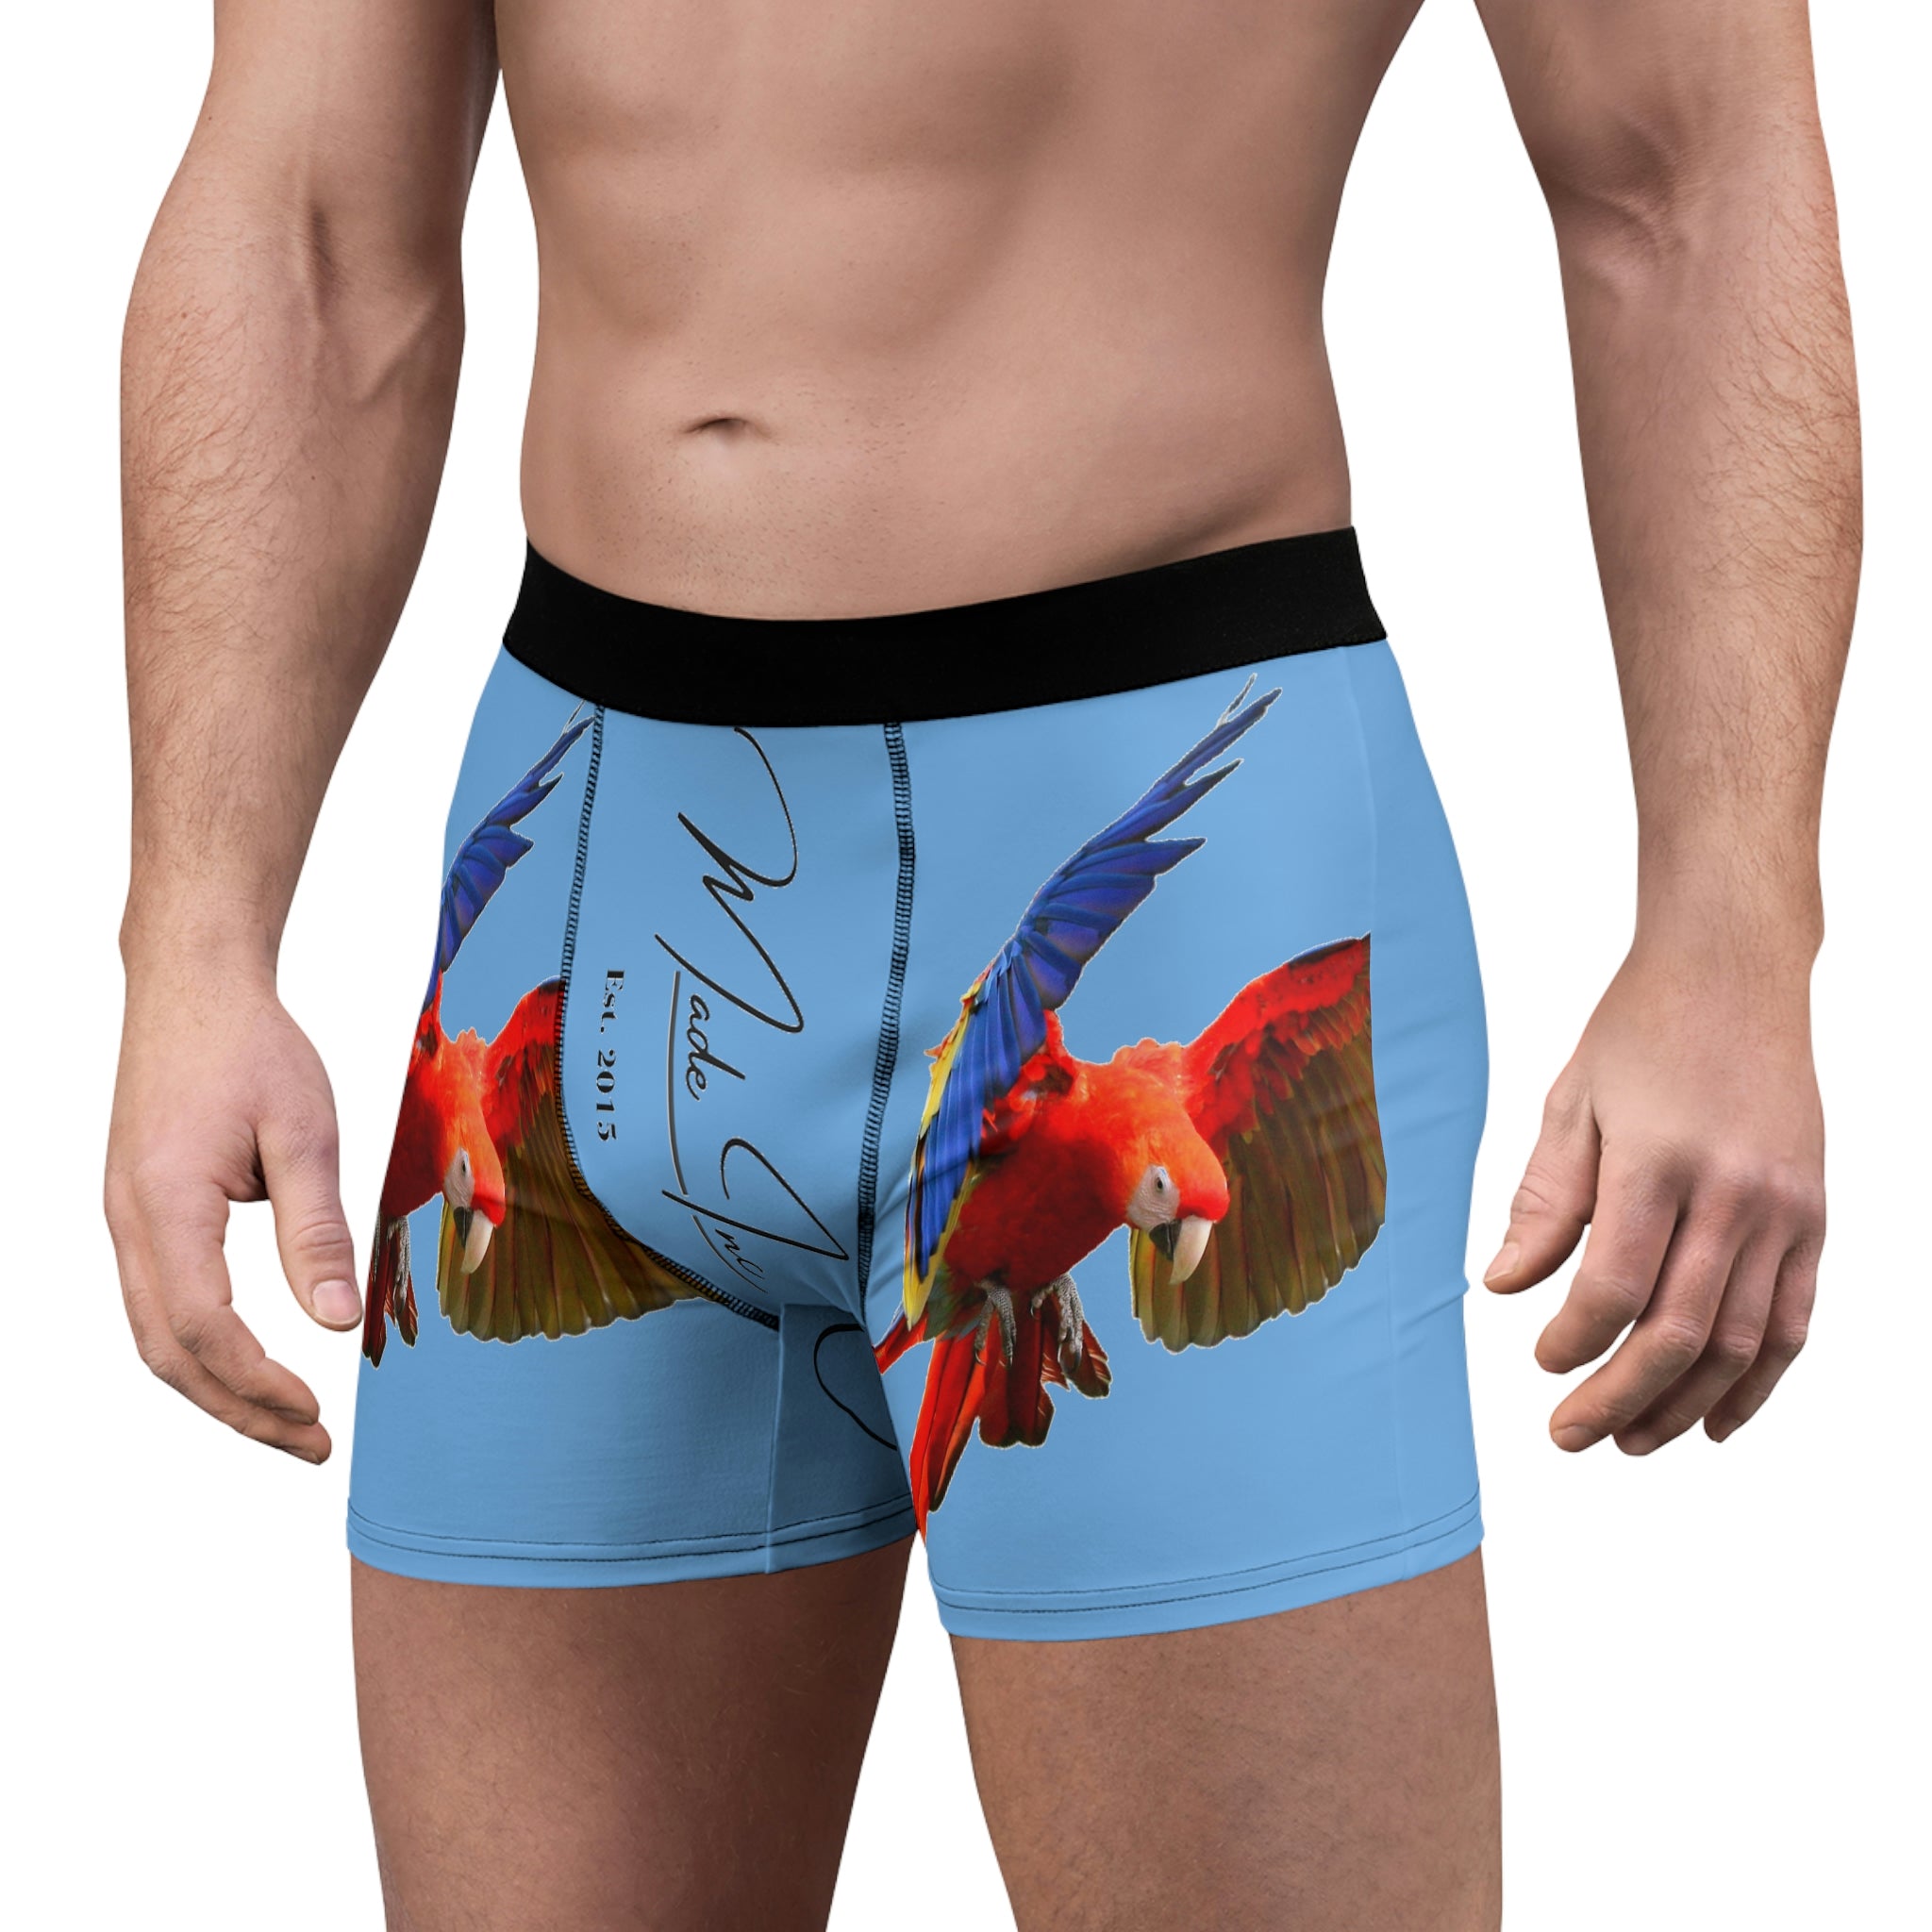 Image of luxury Scarlet Macaw Custom Men's Boxer Briefs by Made Inc, made from lightweight polyester fabric. Designed for comfort and style, perfect for everyday wear.